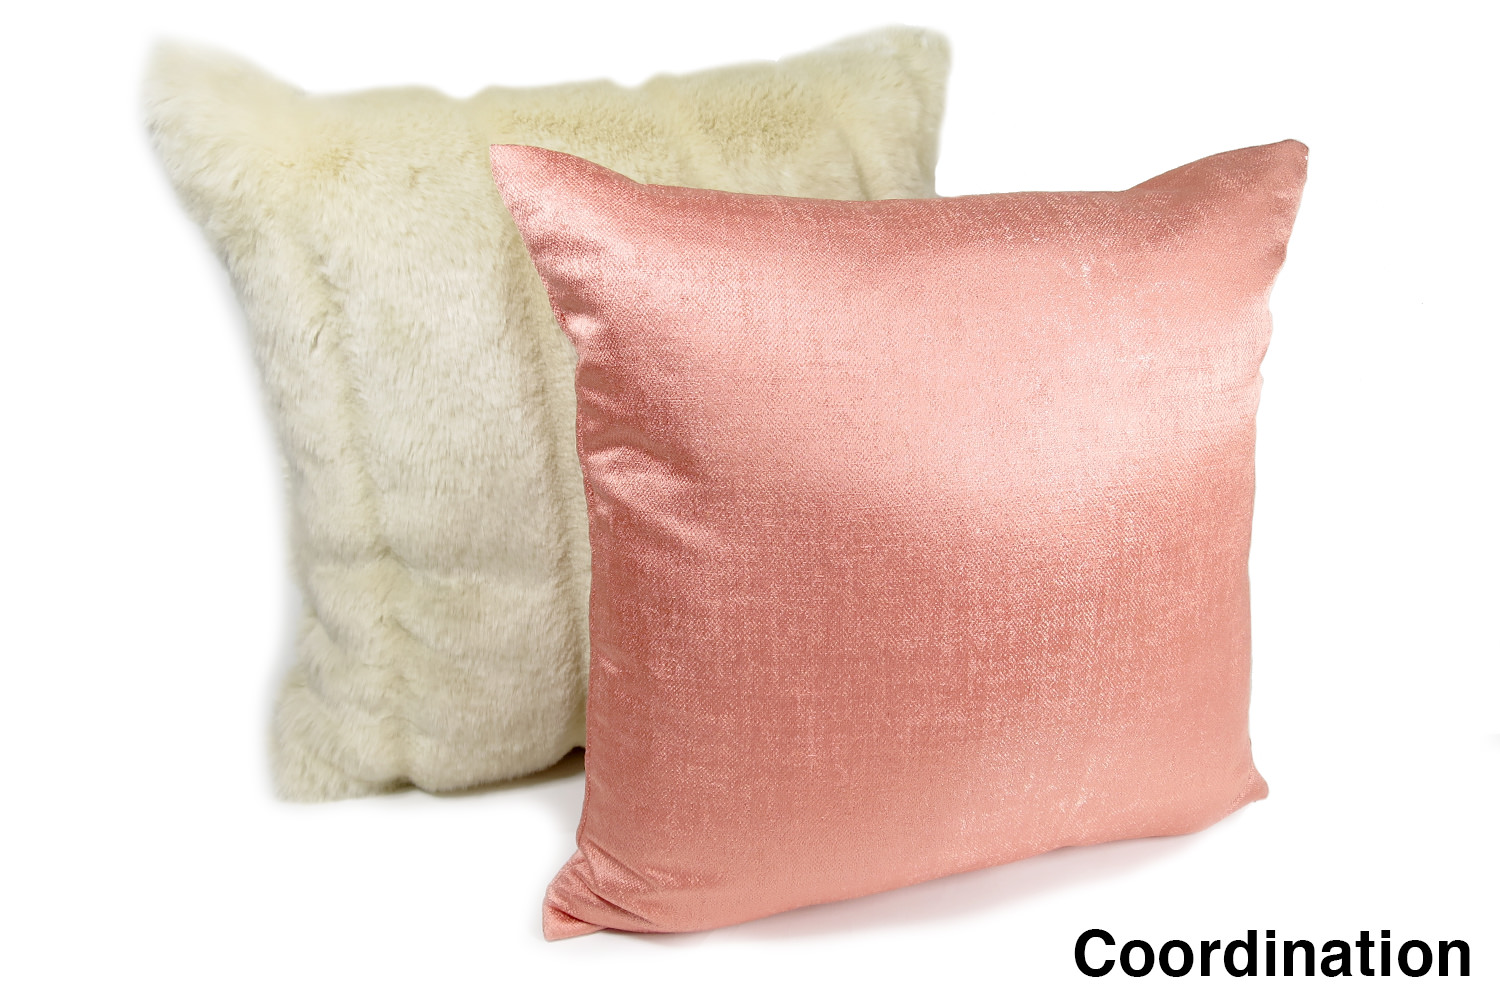 ad-linen-coral-40